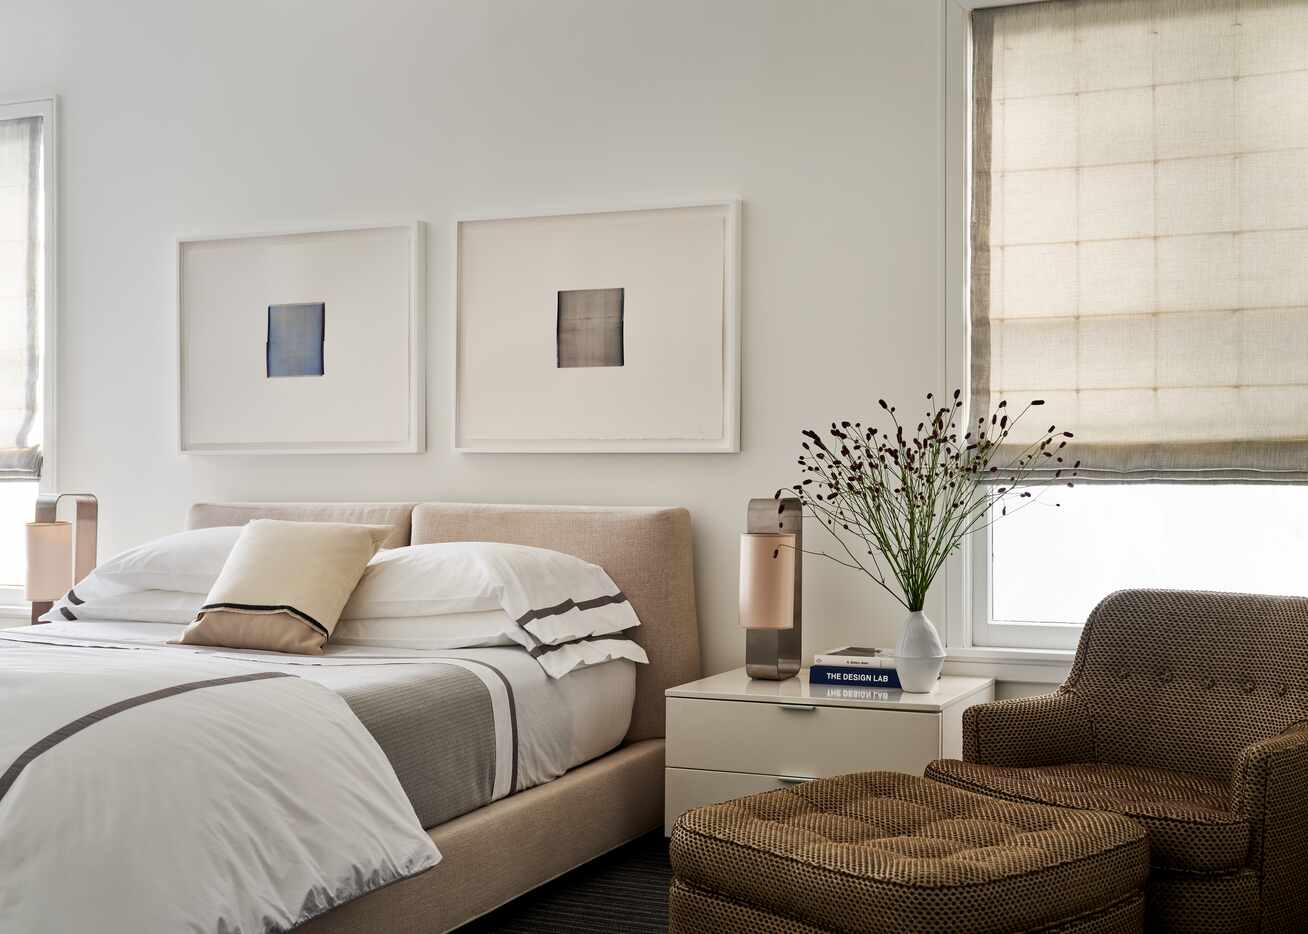 In a bedroom, two framed art pieces hang over the bed and a chair sits adjacent to the...